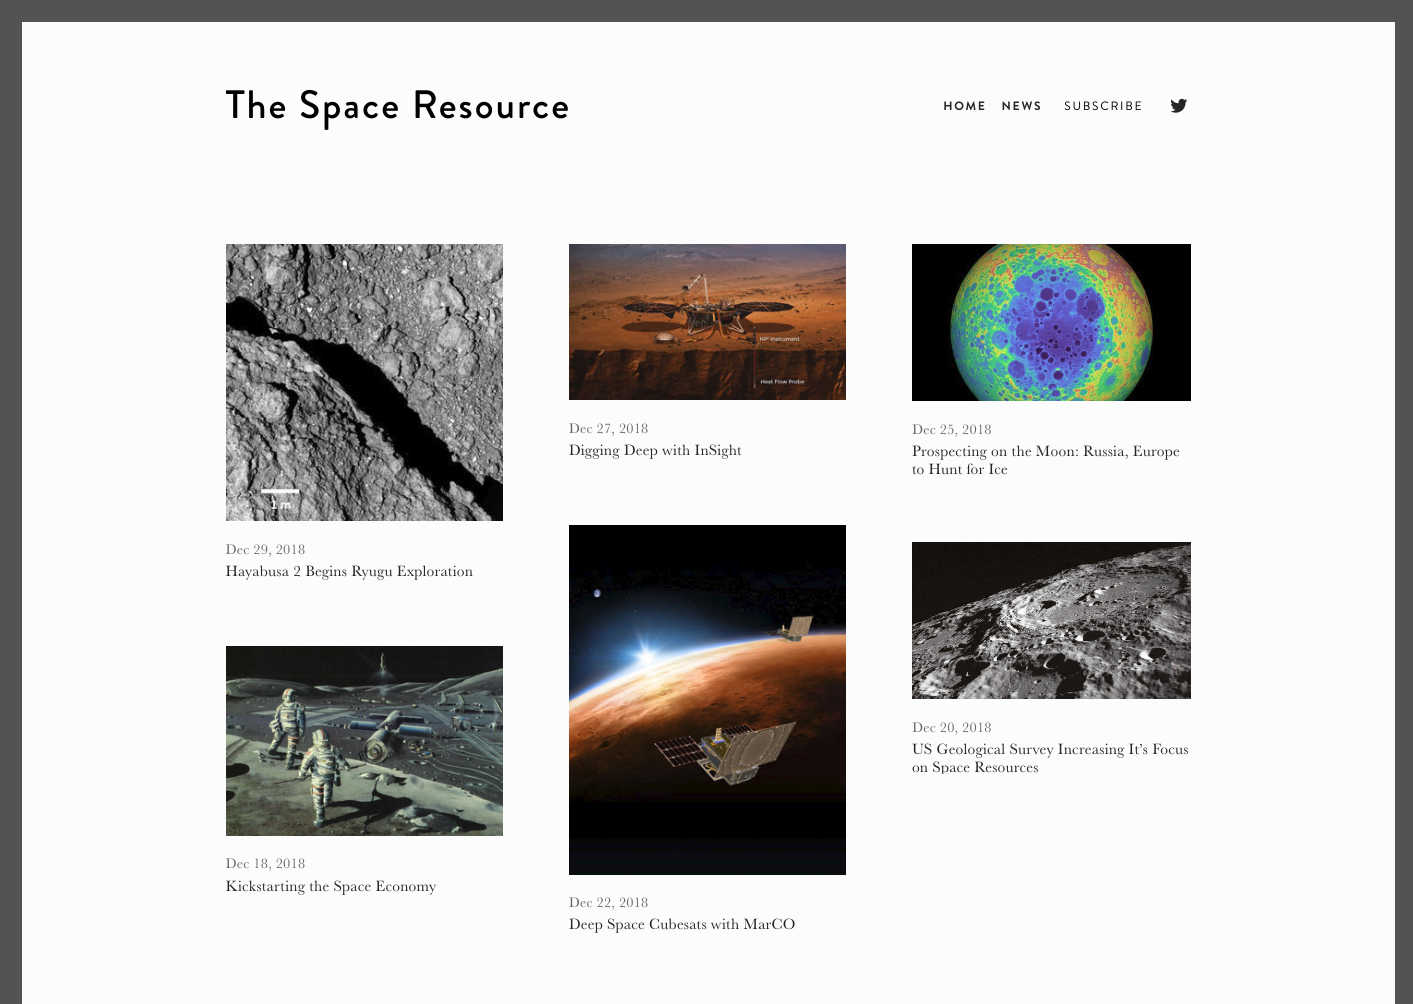 The Space Resource home page